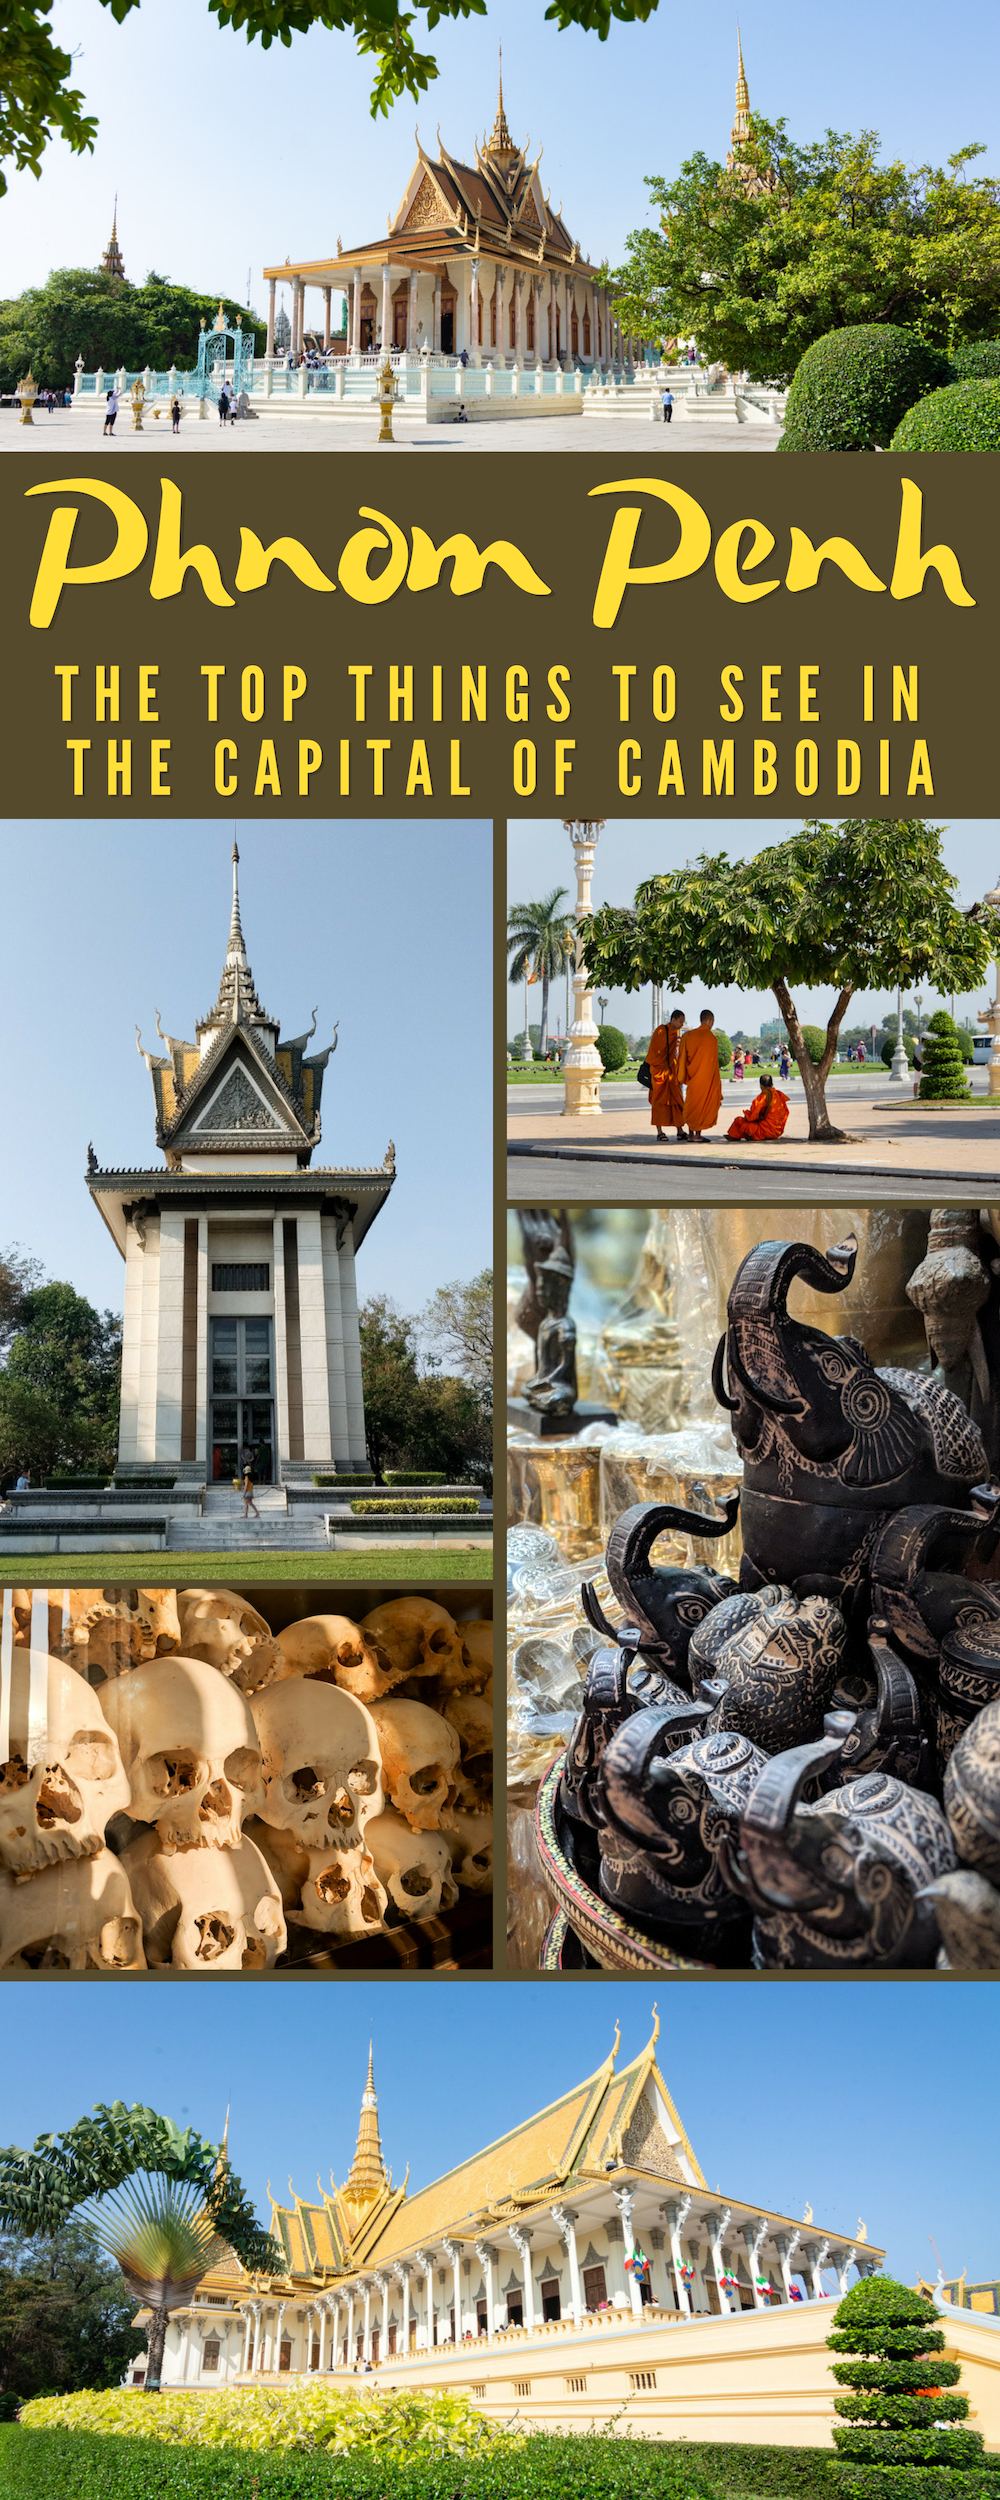 Top Things to See & Do in Phnom Penh, Cambodia